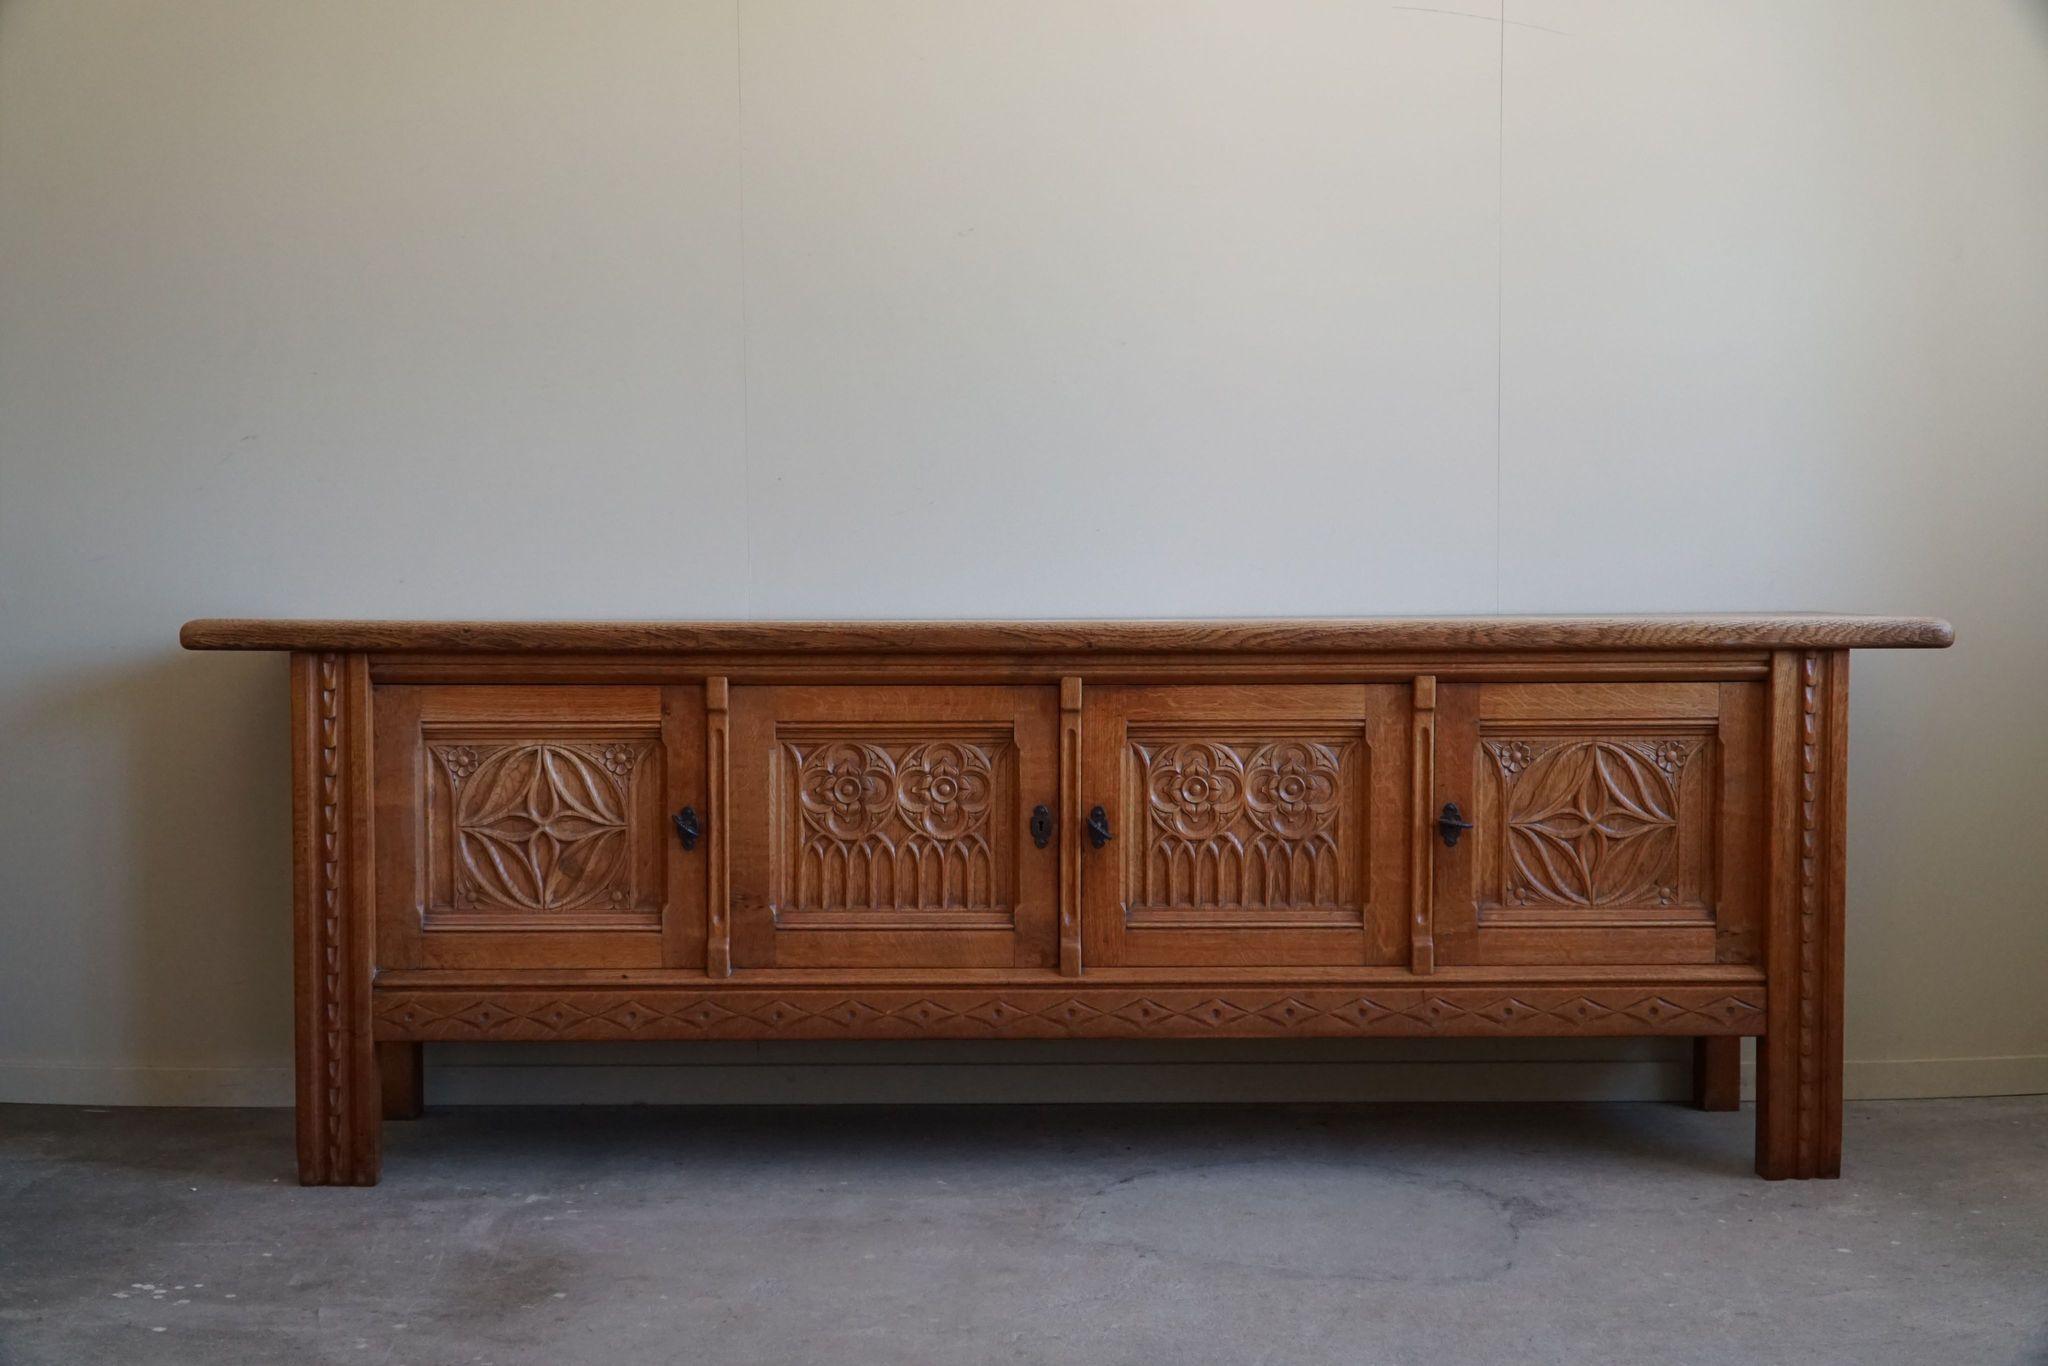 20th Century Mid Century Modern Sideboard in Oak, Handcrafted by a Danish Cabinetmaker, 1950s For Sale